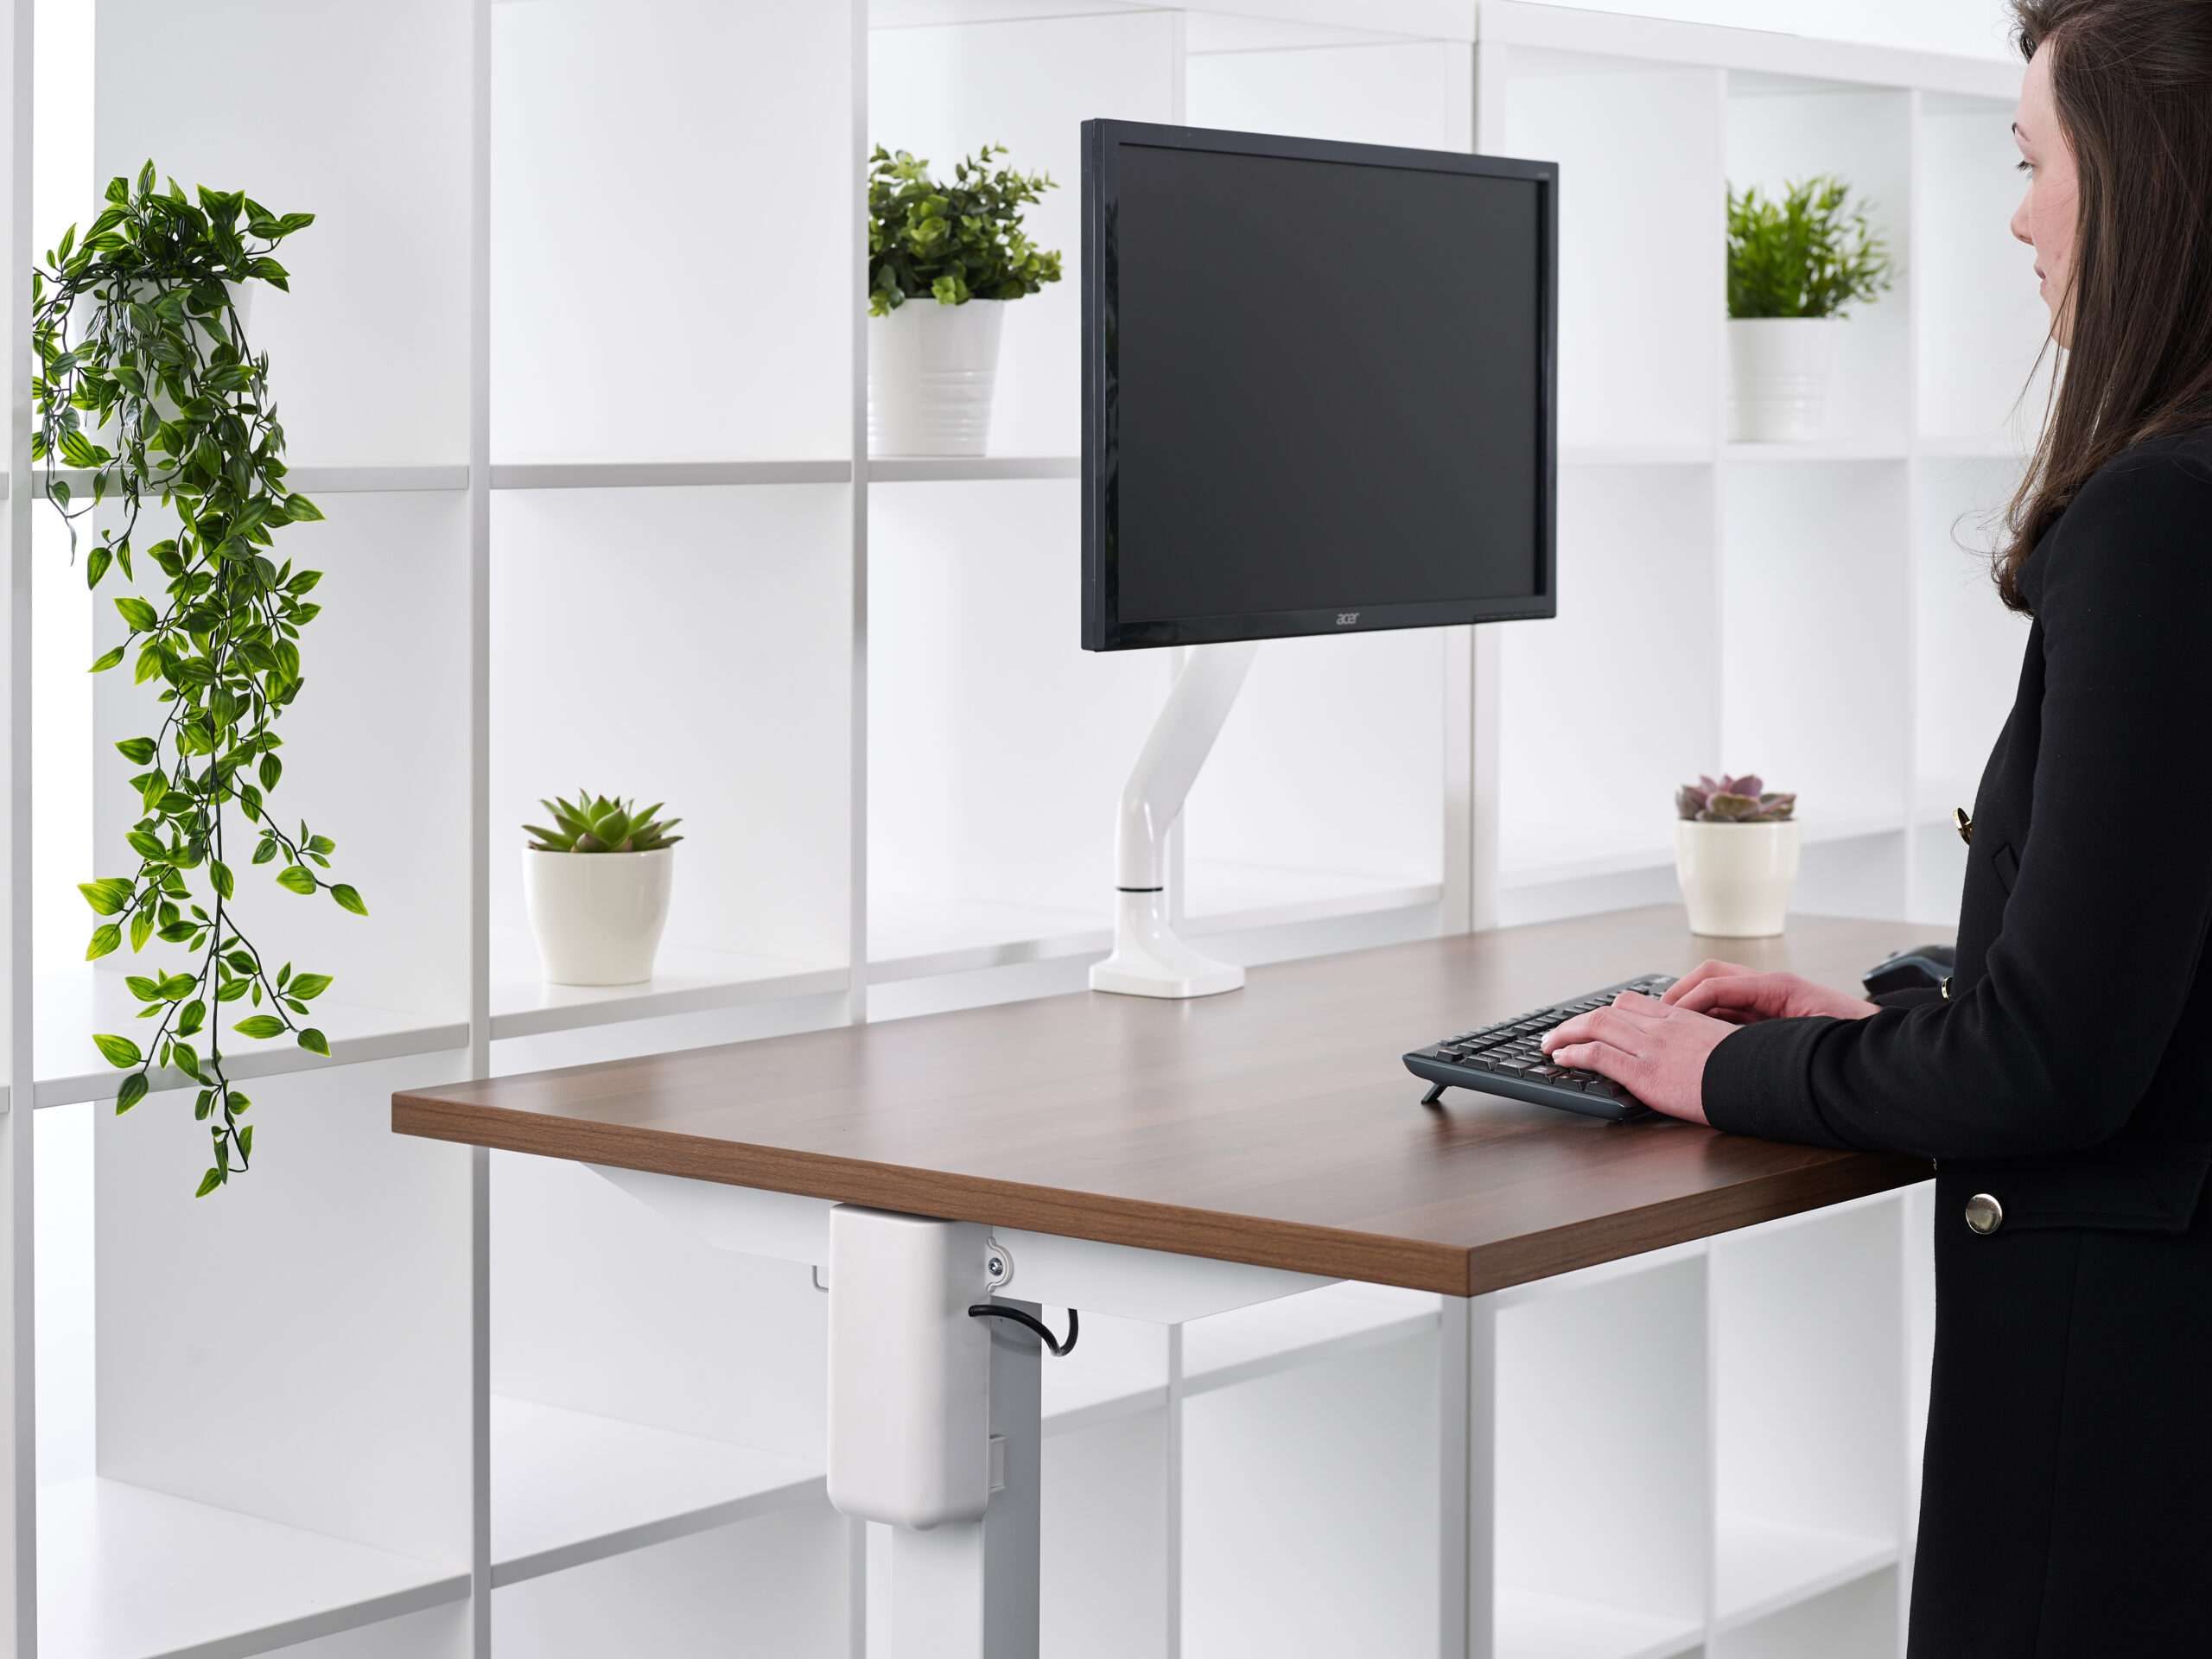 Ways to improve your posture with a standing desk - Blog post by Lavoro Design